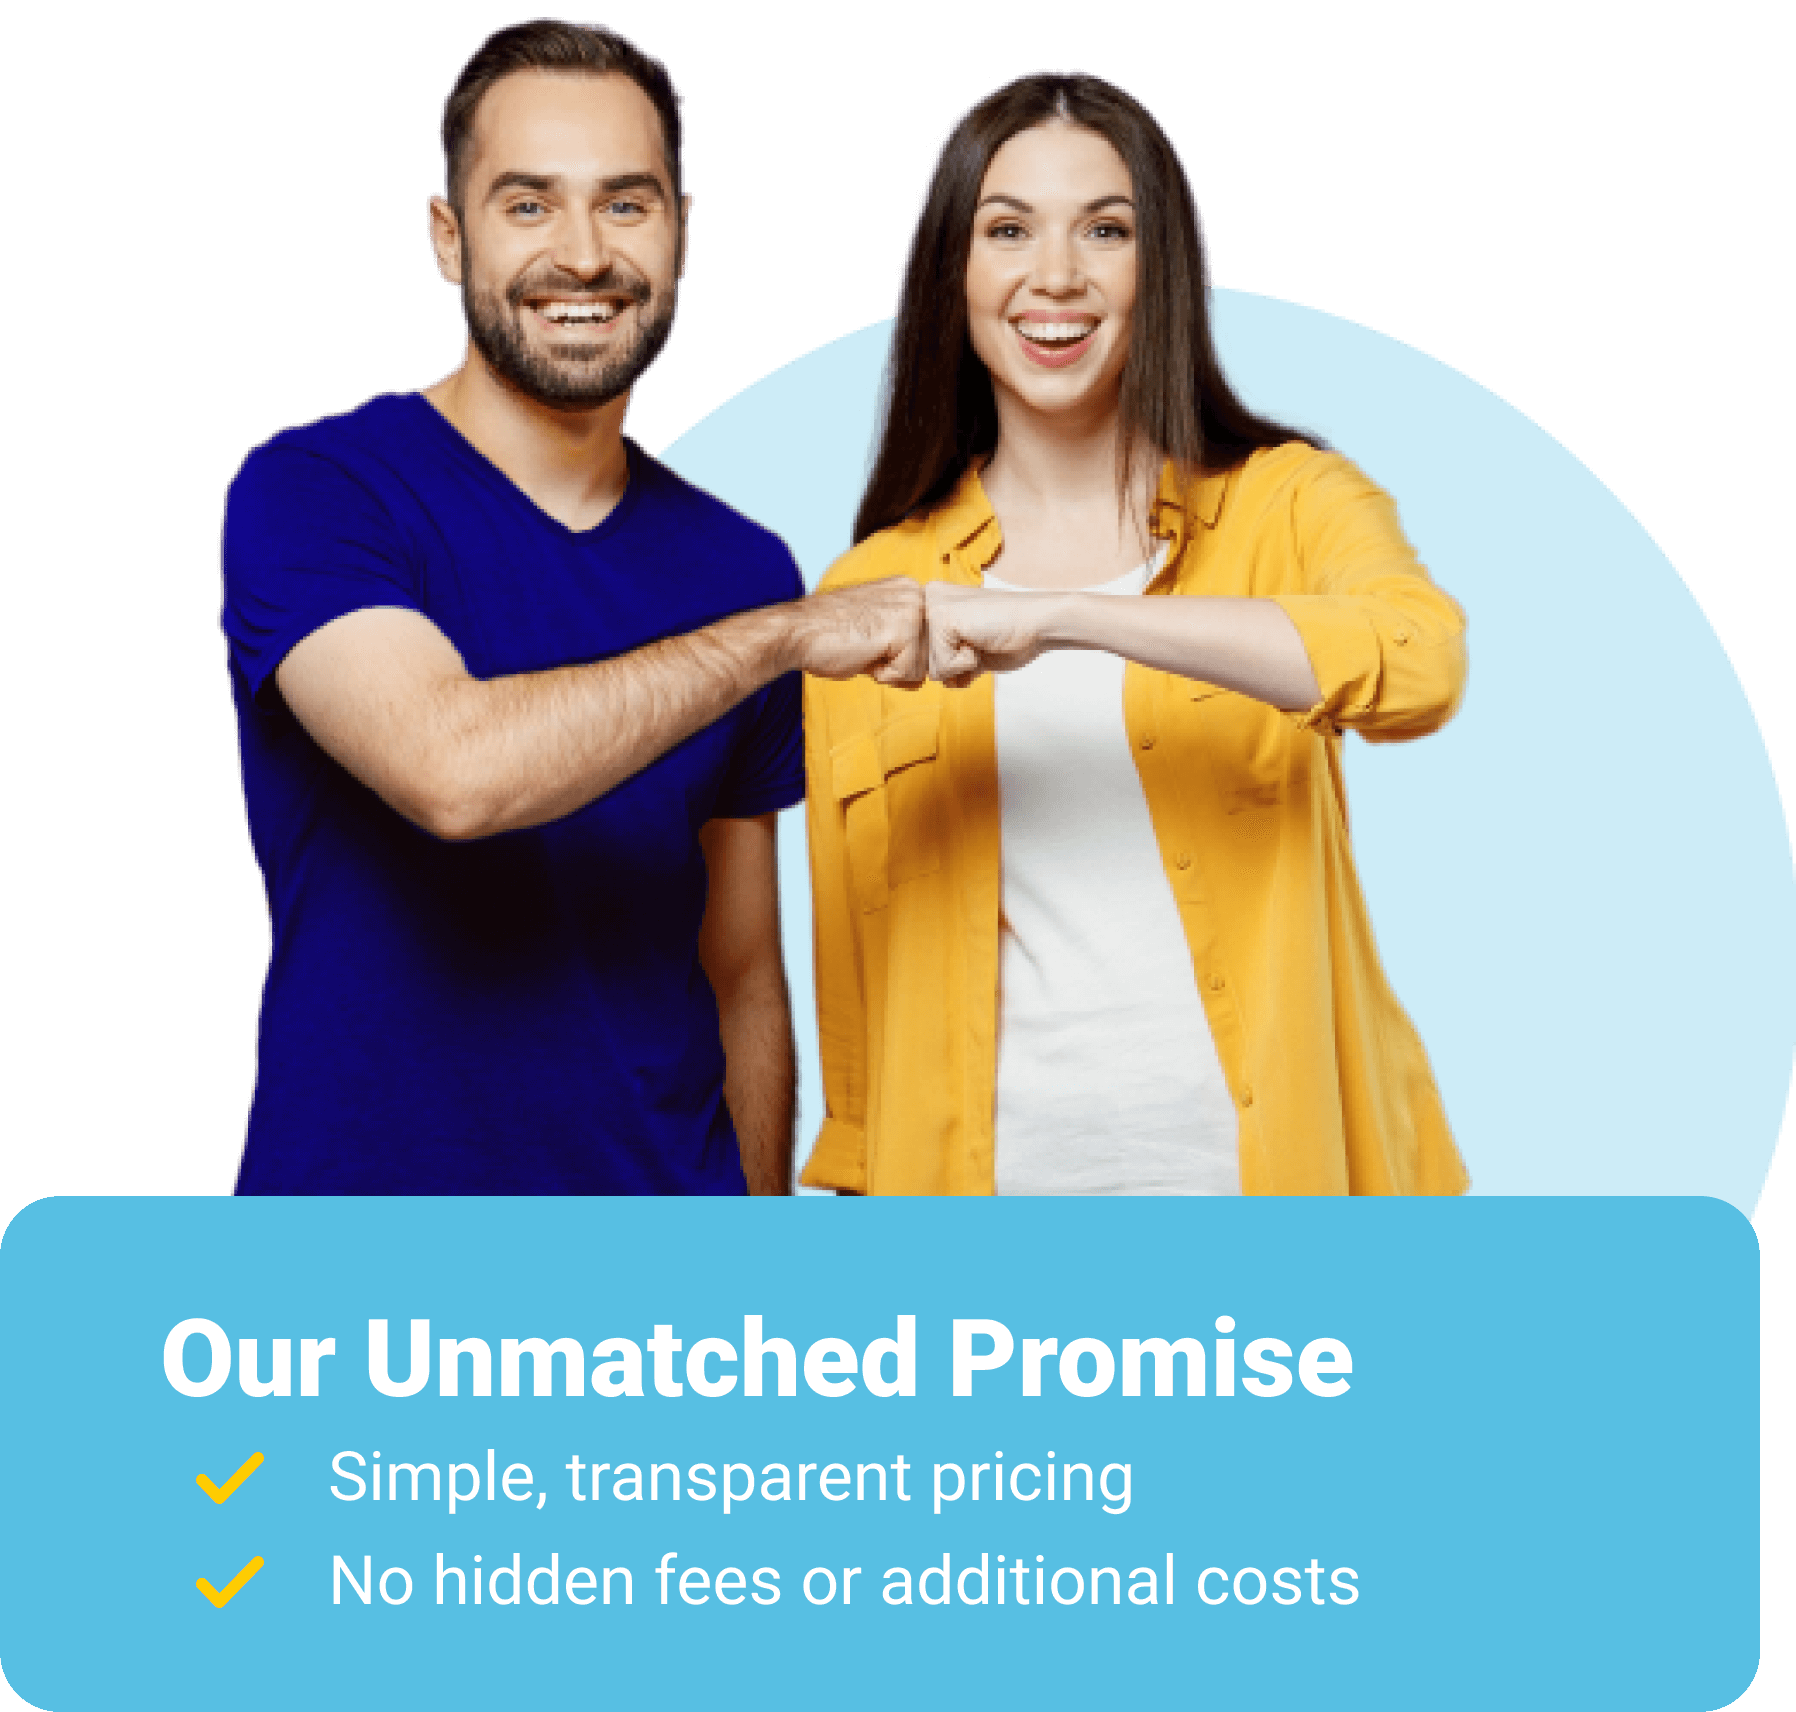 Image of a man and woman fist bumping and smiling. There's a box underneath that says 'Our Unmatched Promise: Pricing that works for everyone, volume and bundle discounts, no onboarding or support cost.'